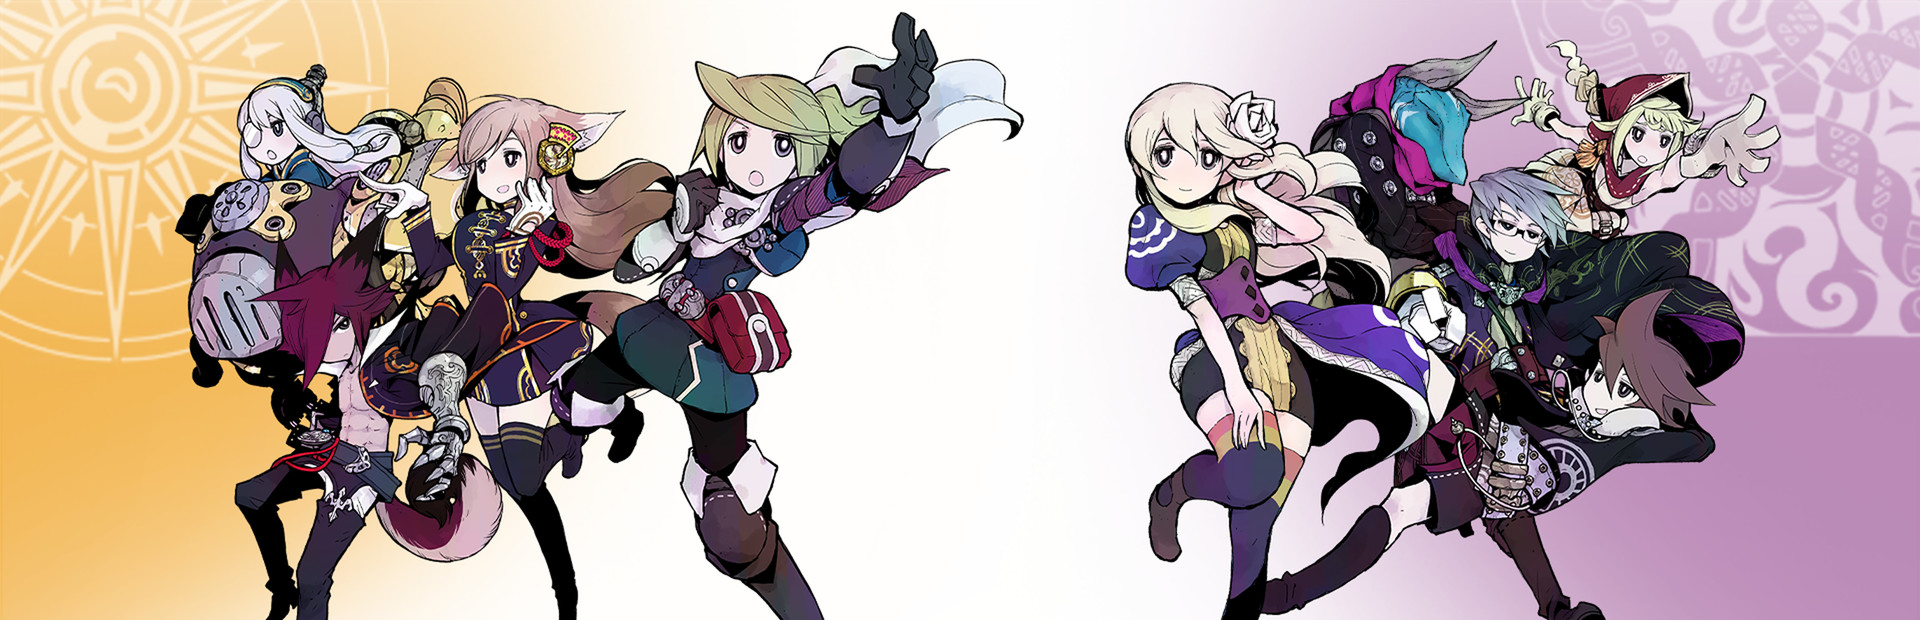 The Alliance Alive HD Remastered cover image